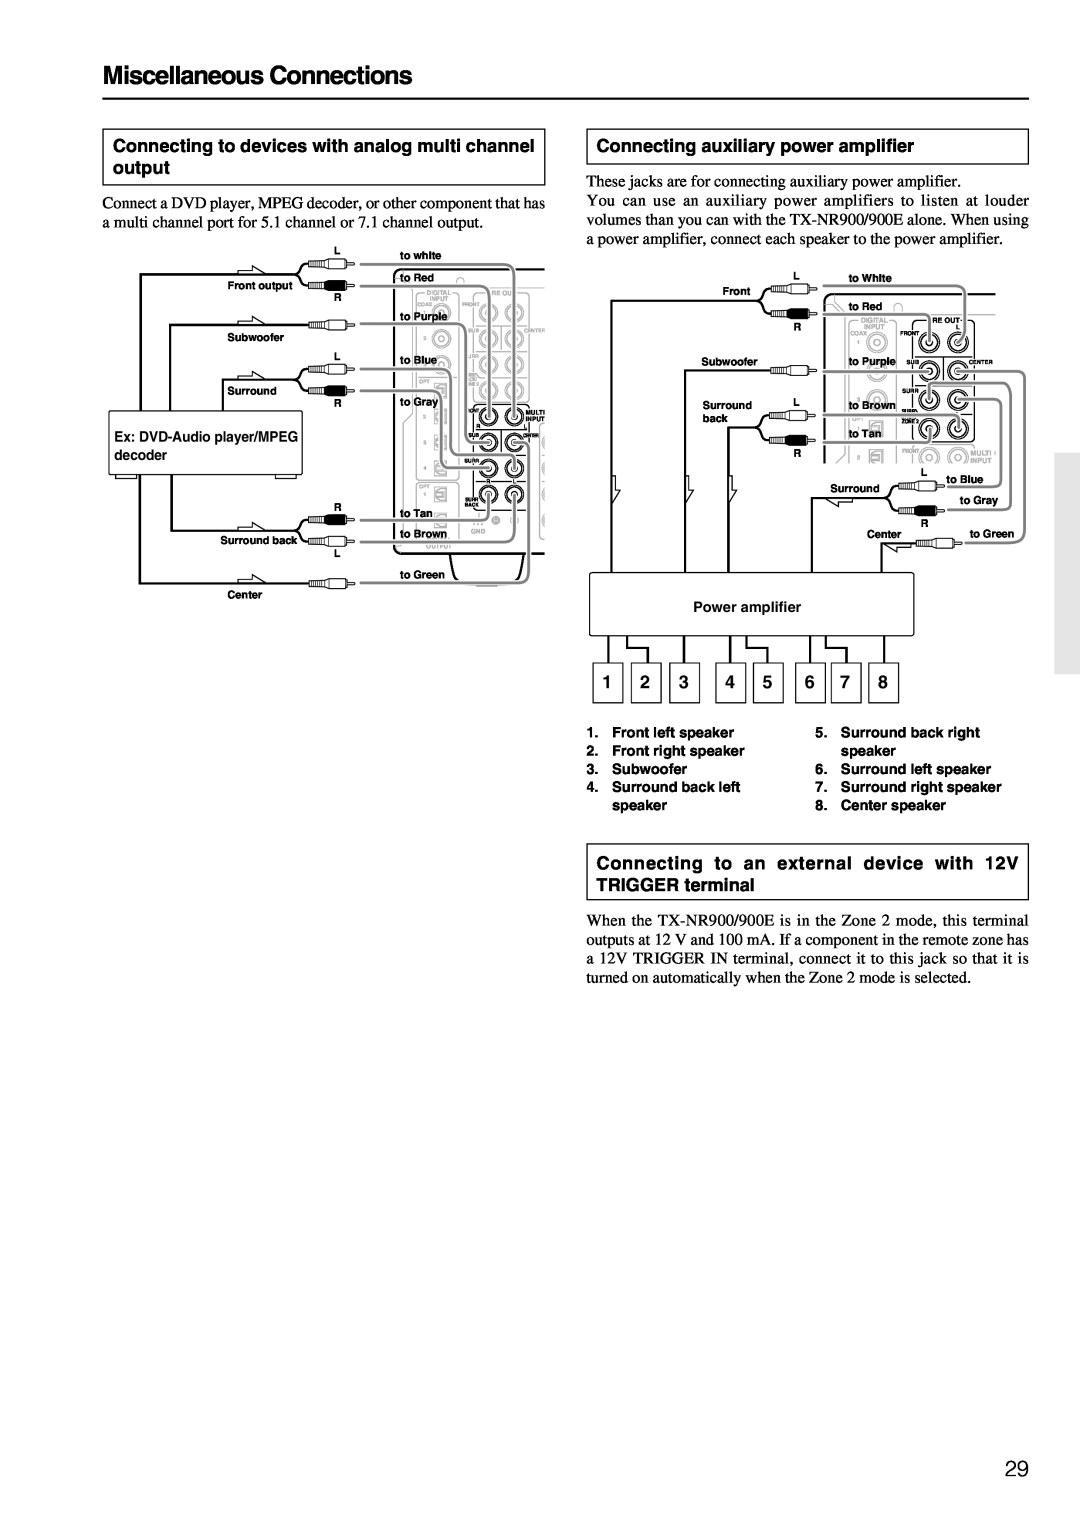 Onkyo TX-NR900E instruction manual Miscellaneous Connections, Connecting auxiliary power amplifier, 1 2 3 4 